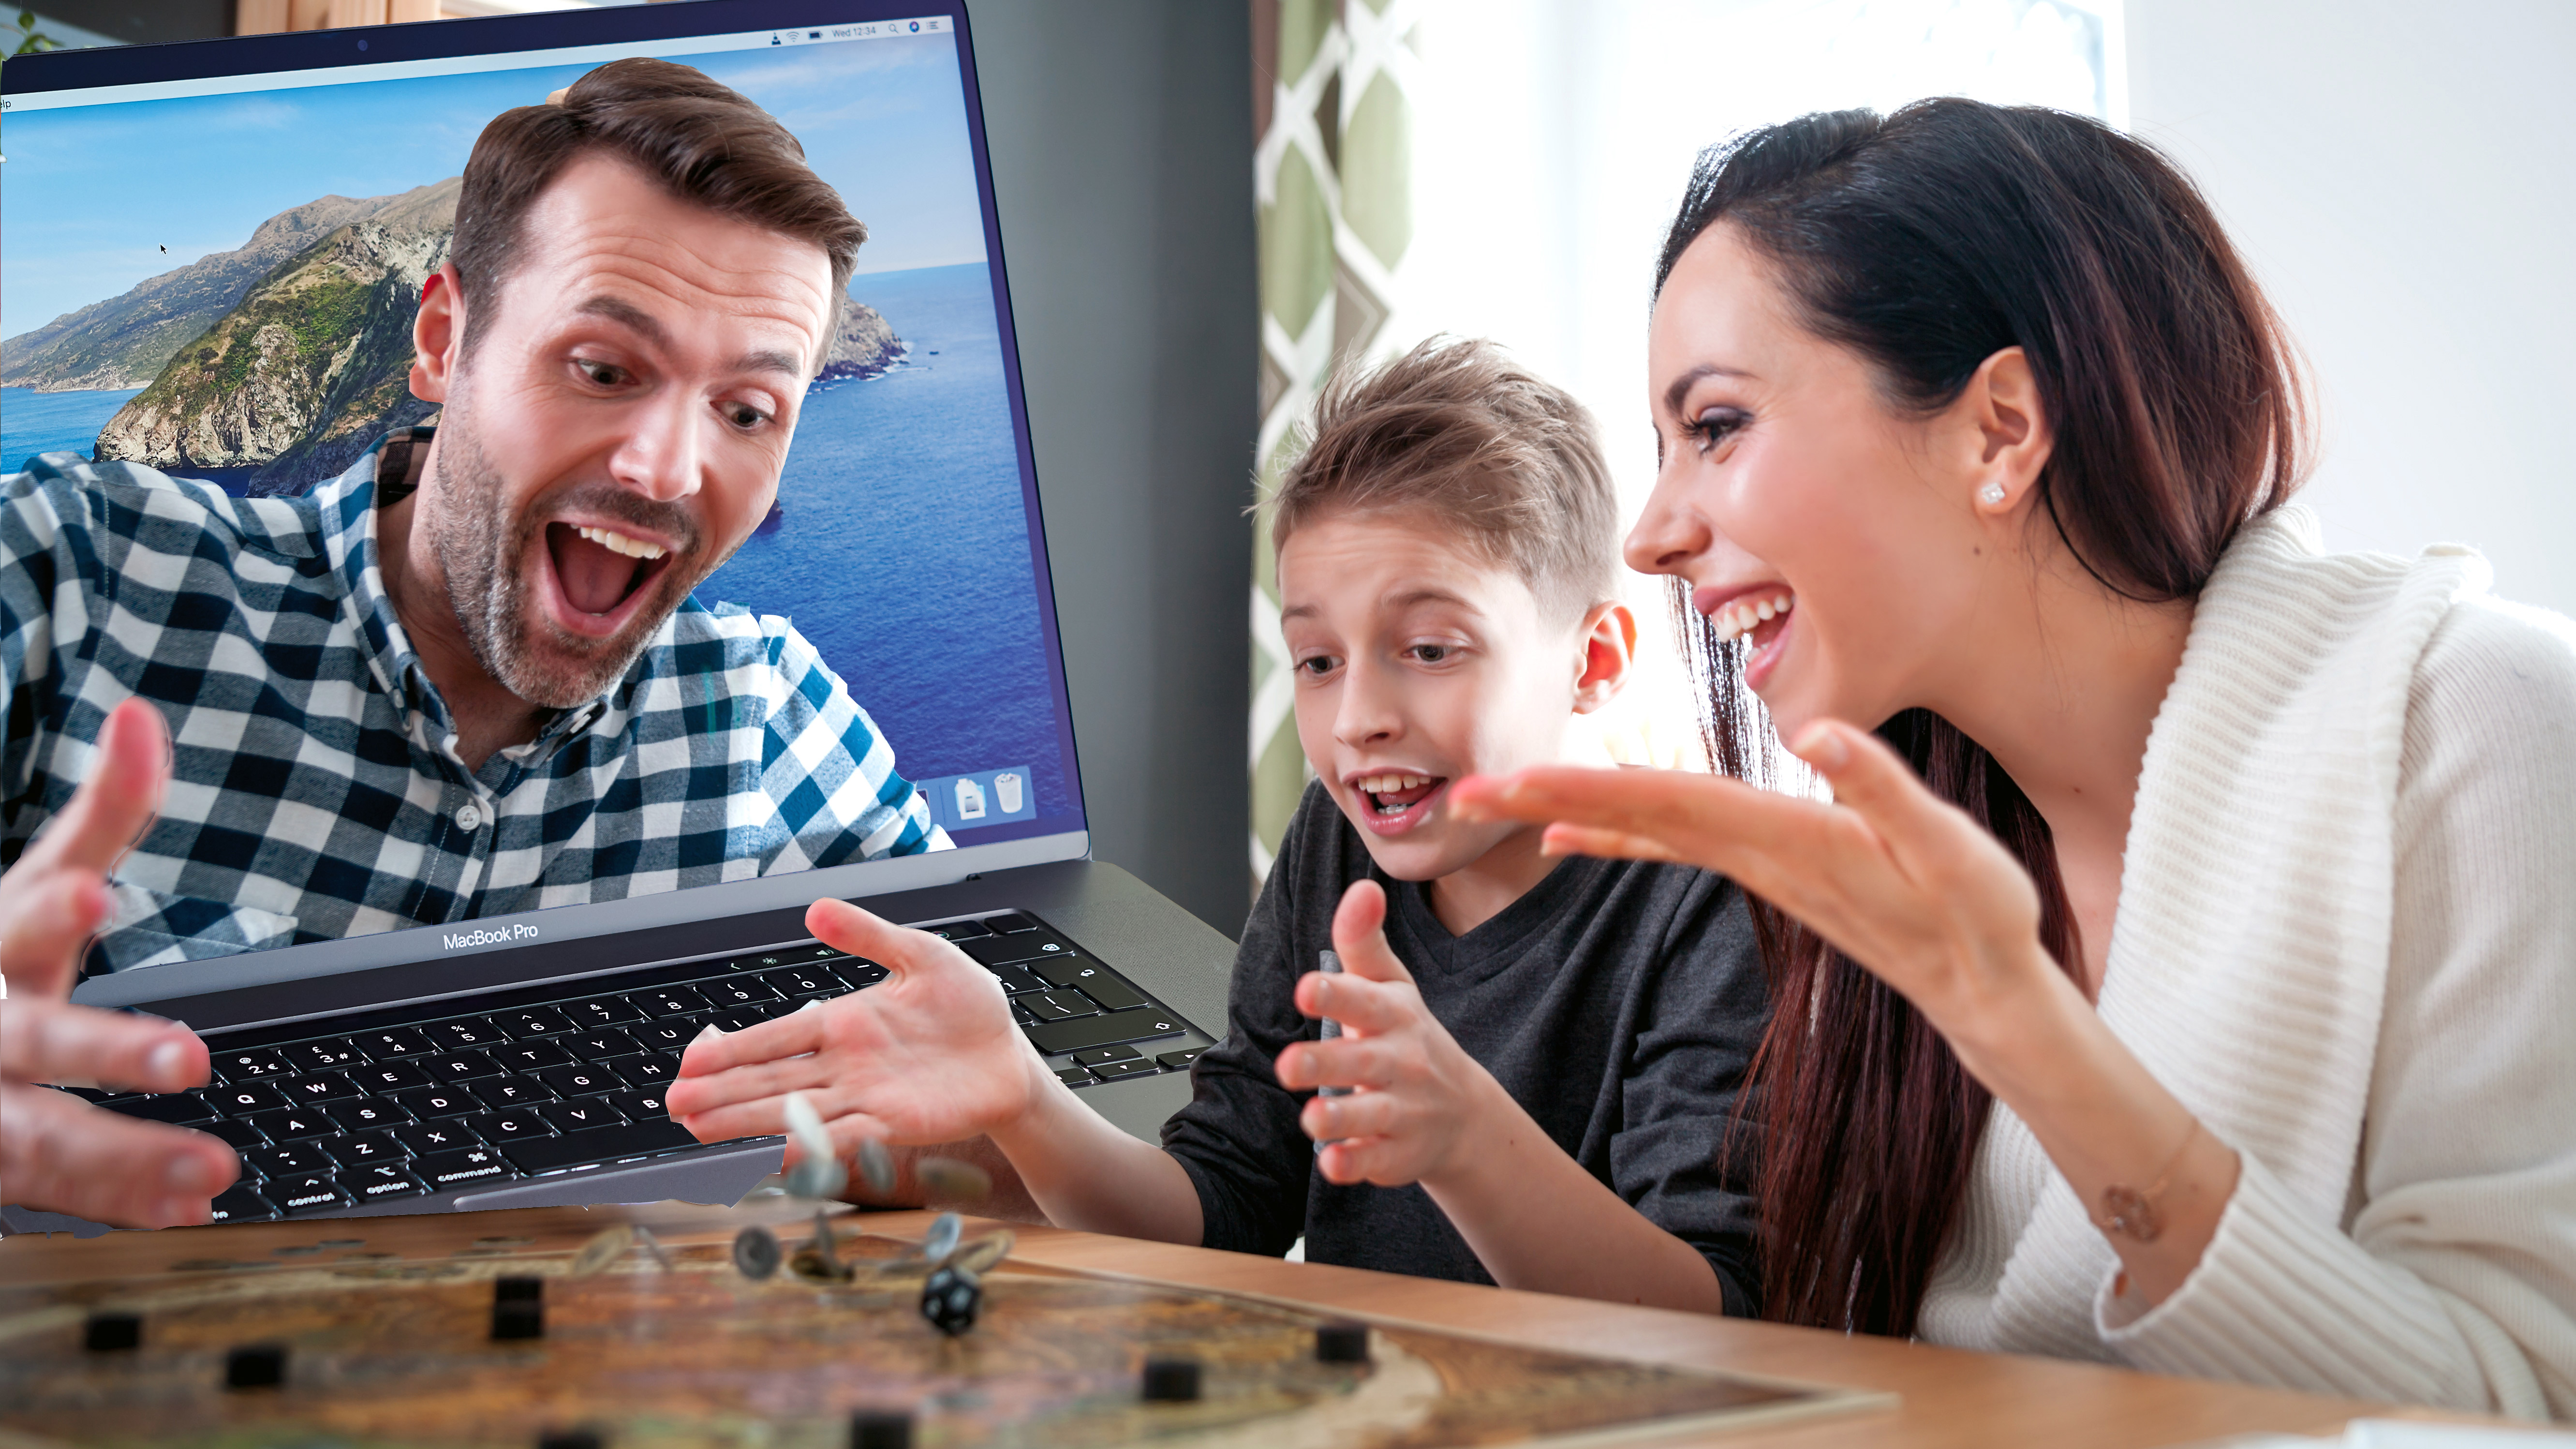 How To Play Board Games Online Play With Friends Or Family Over The Web Techradar,Greenply Marine Grade Plywood